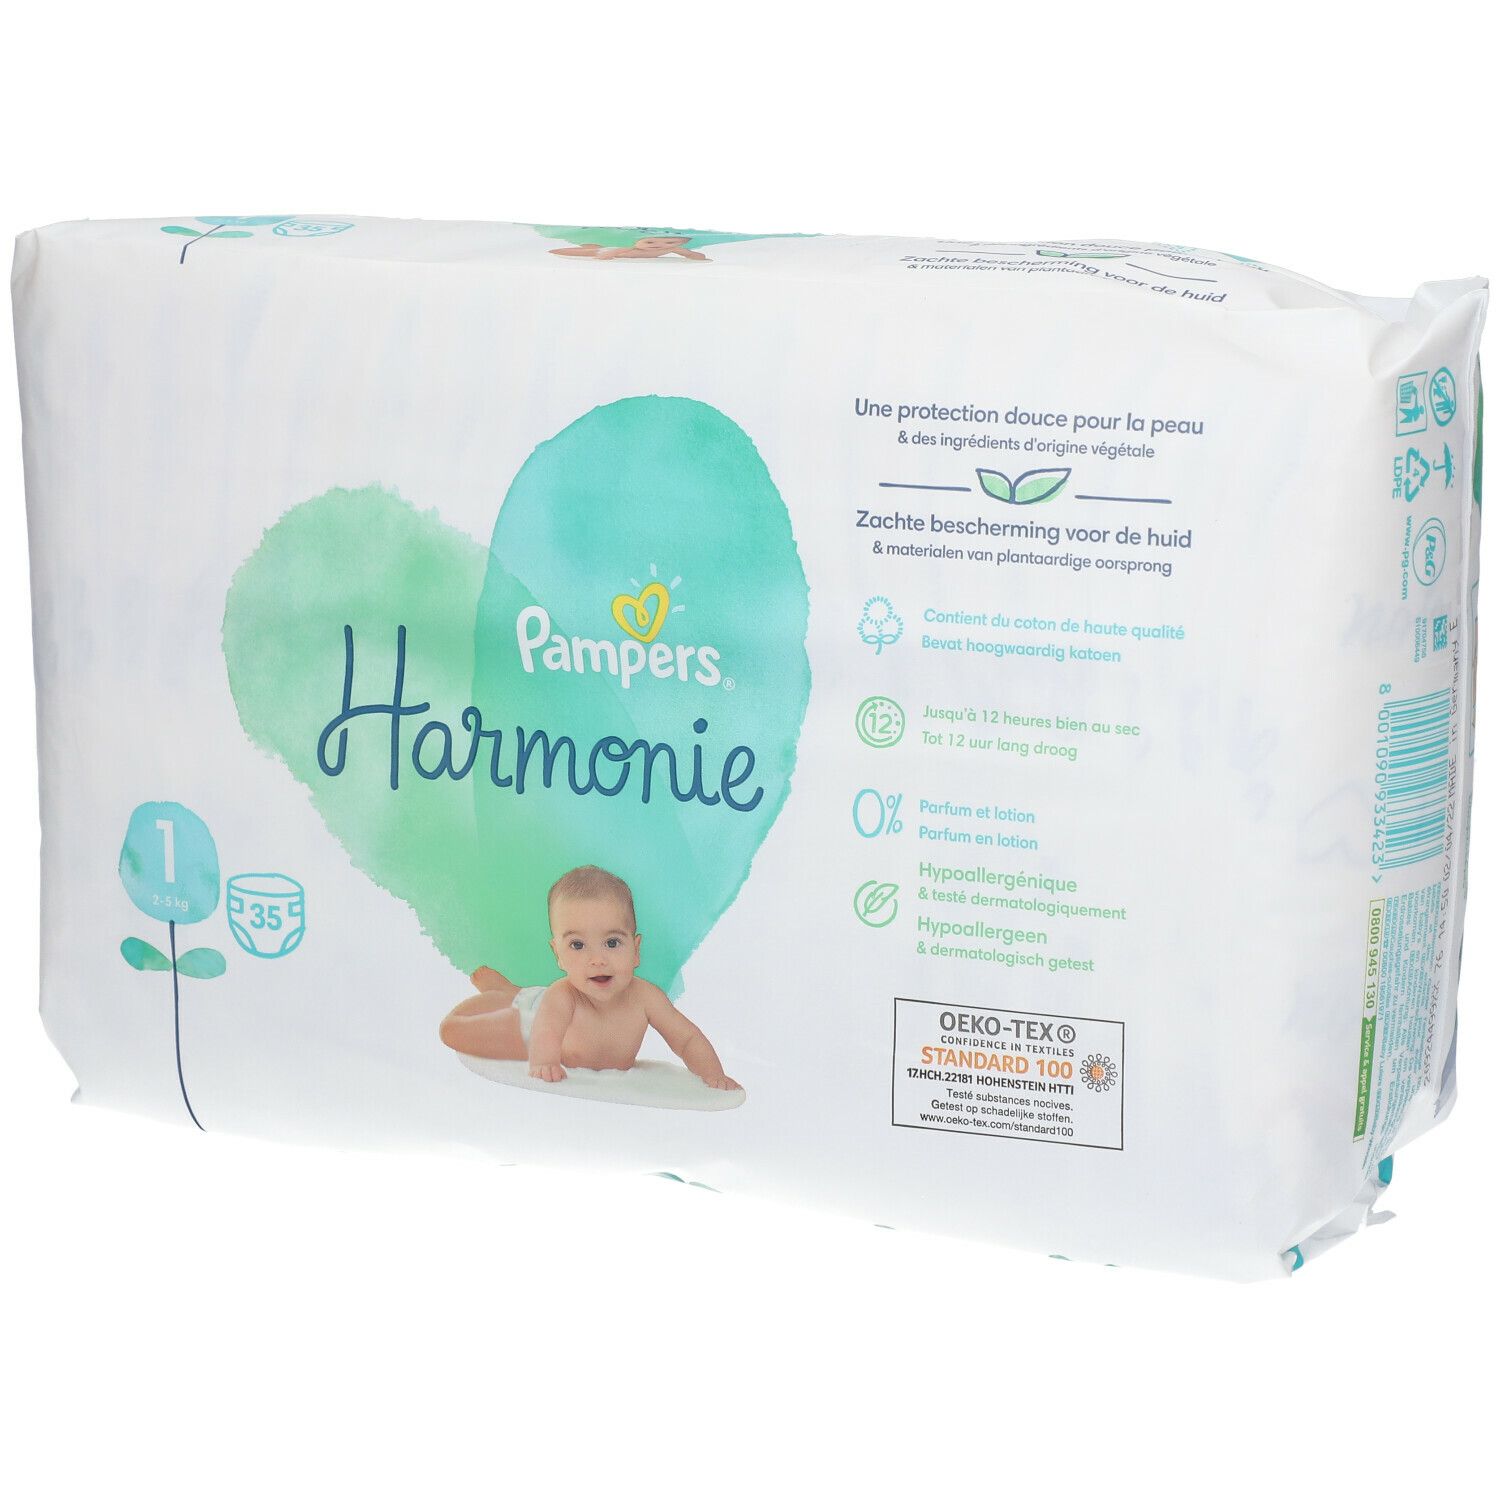 Pampers® Harmonie Couches Taille 1, 2-5 kg